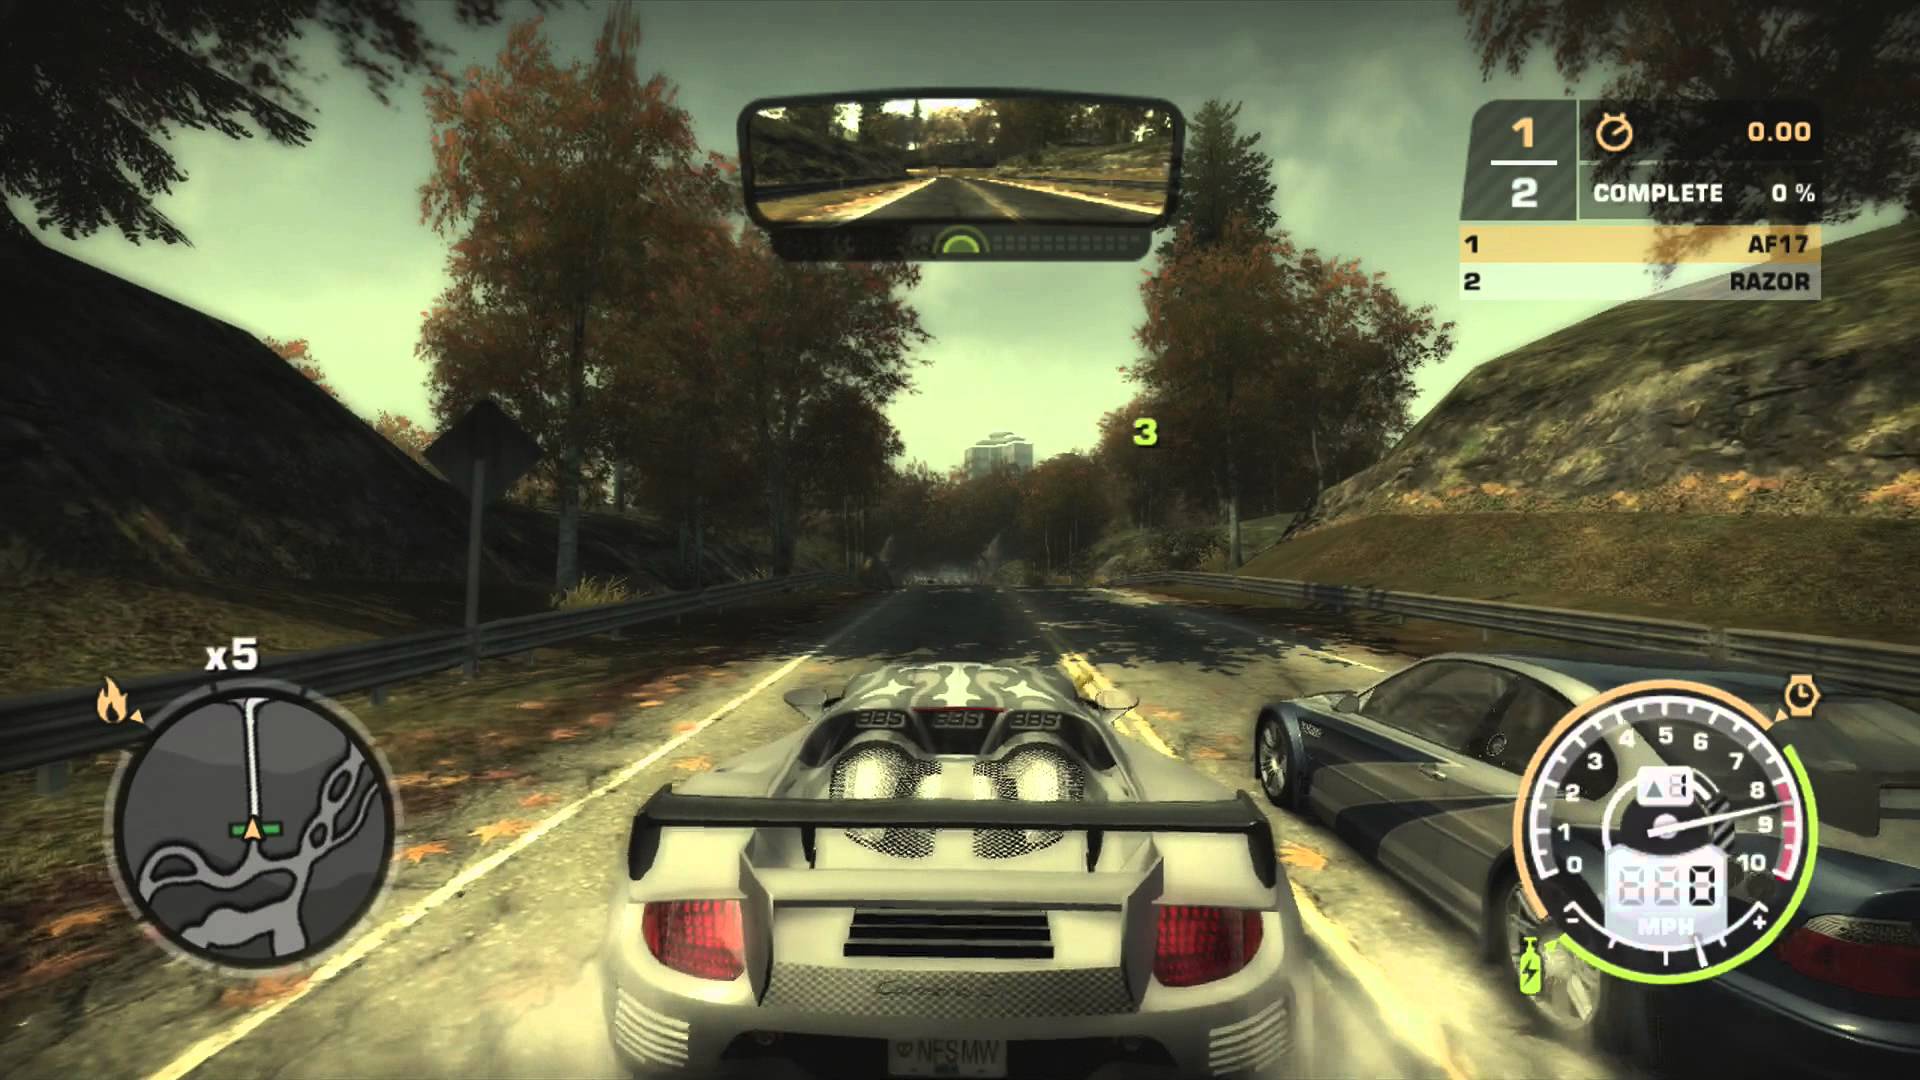 Песни из игры need for speed. Гонки NFS most wanted. Нид фор СПИД most wanted 2005. Нфс мост вантед 2005. Most wanted 2005 геймплей.